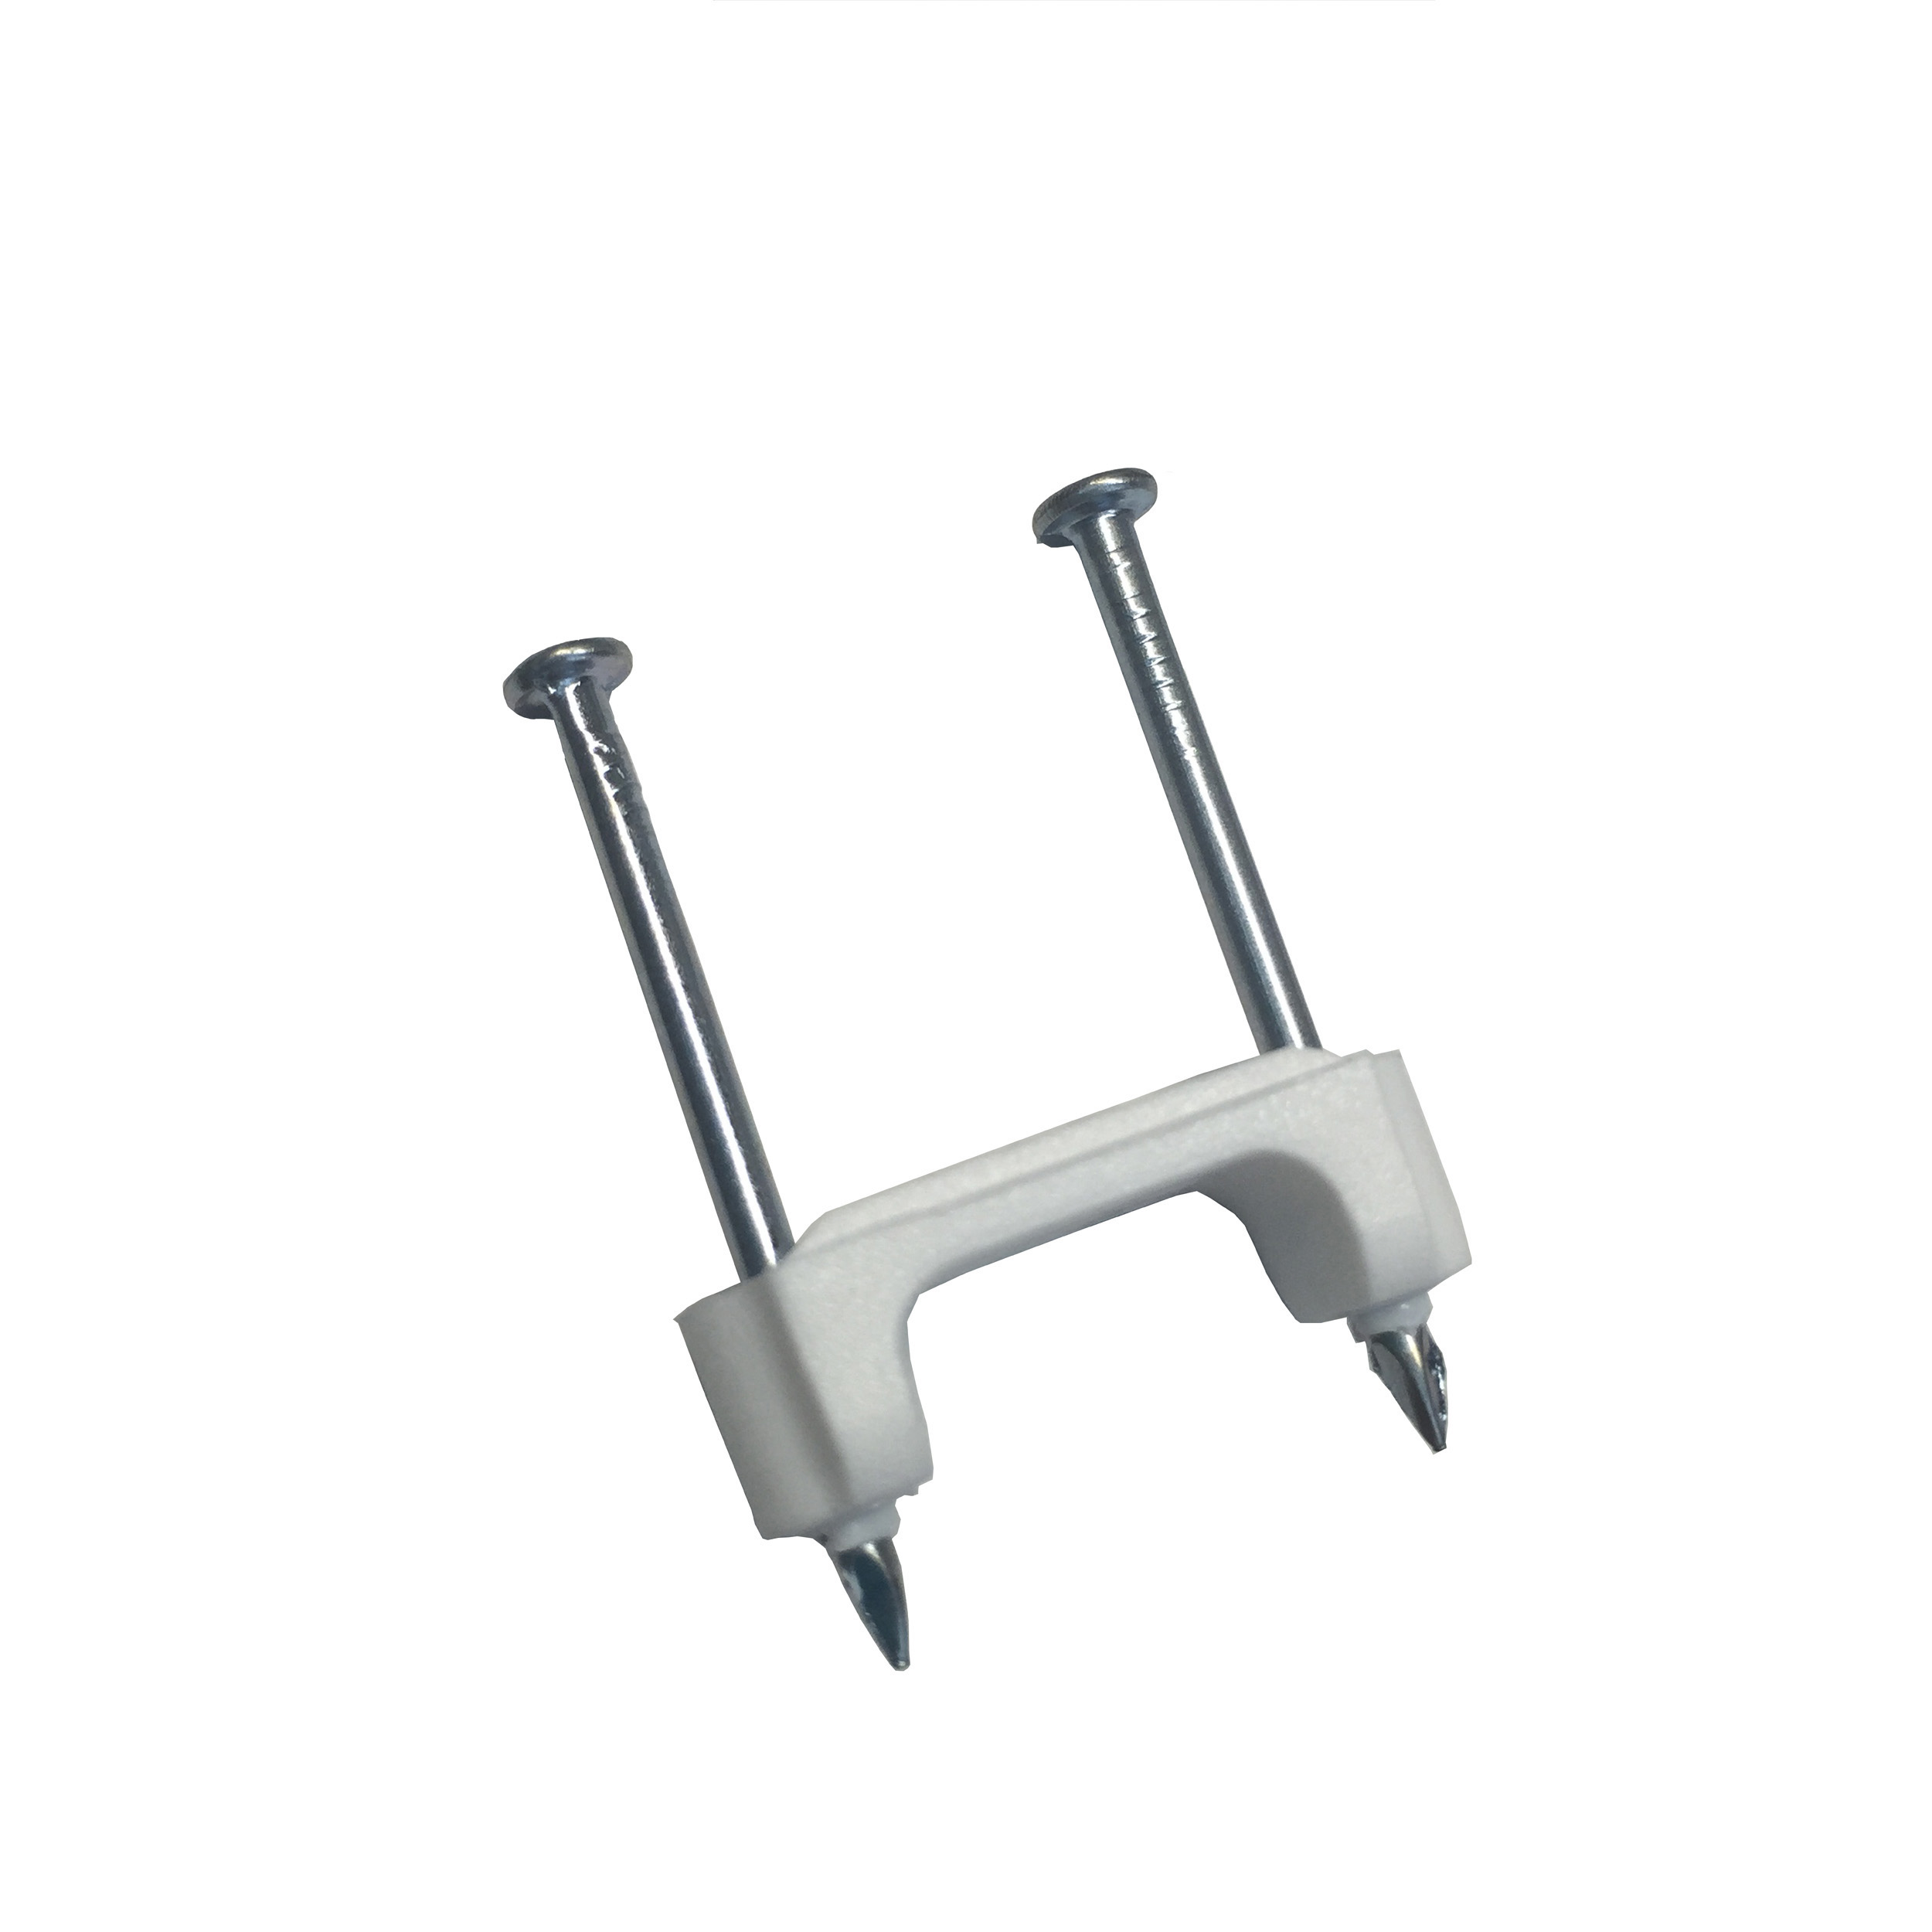 Reviews for Gardner Bender Wire Spool Hand Caddy